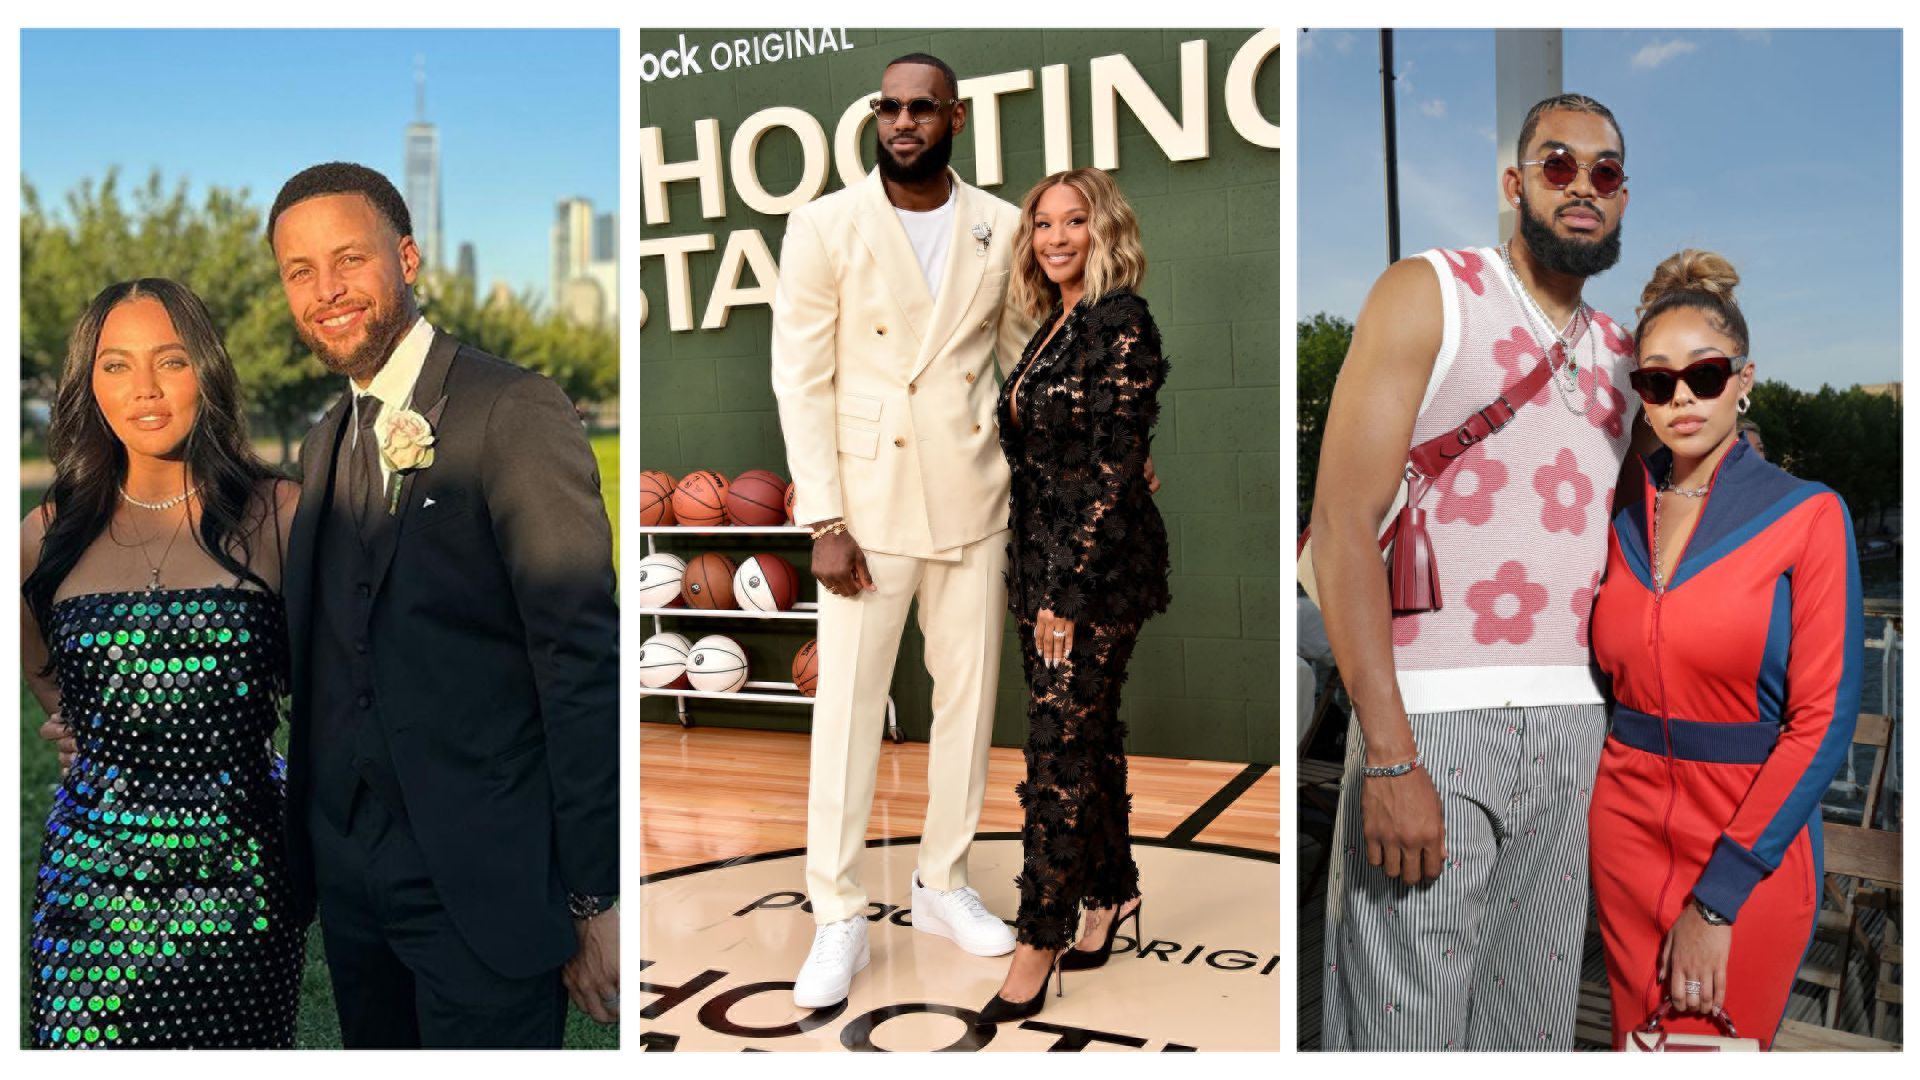 Meet the NBA stars' wives and girlfriends